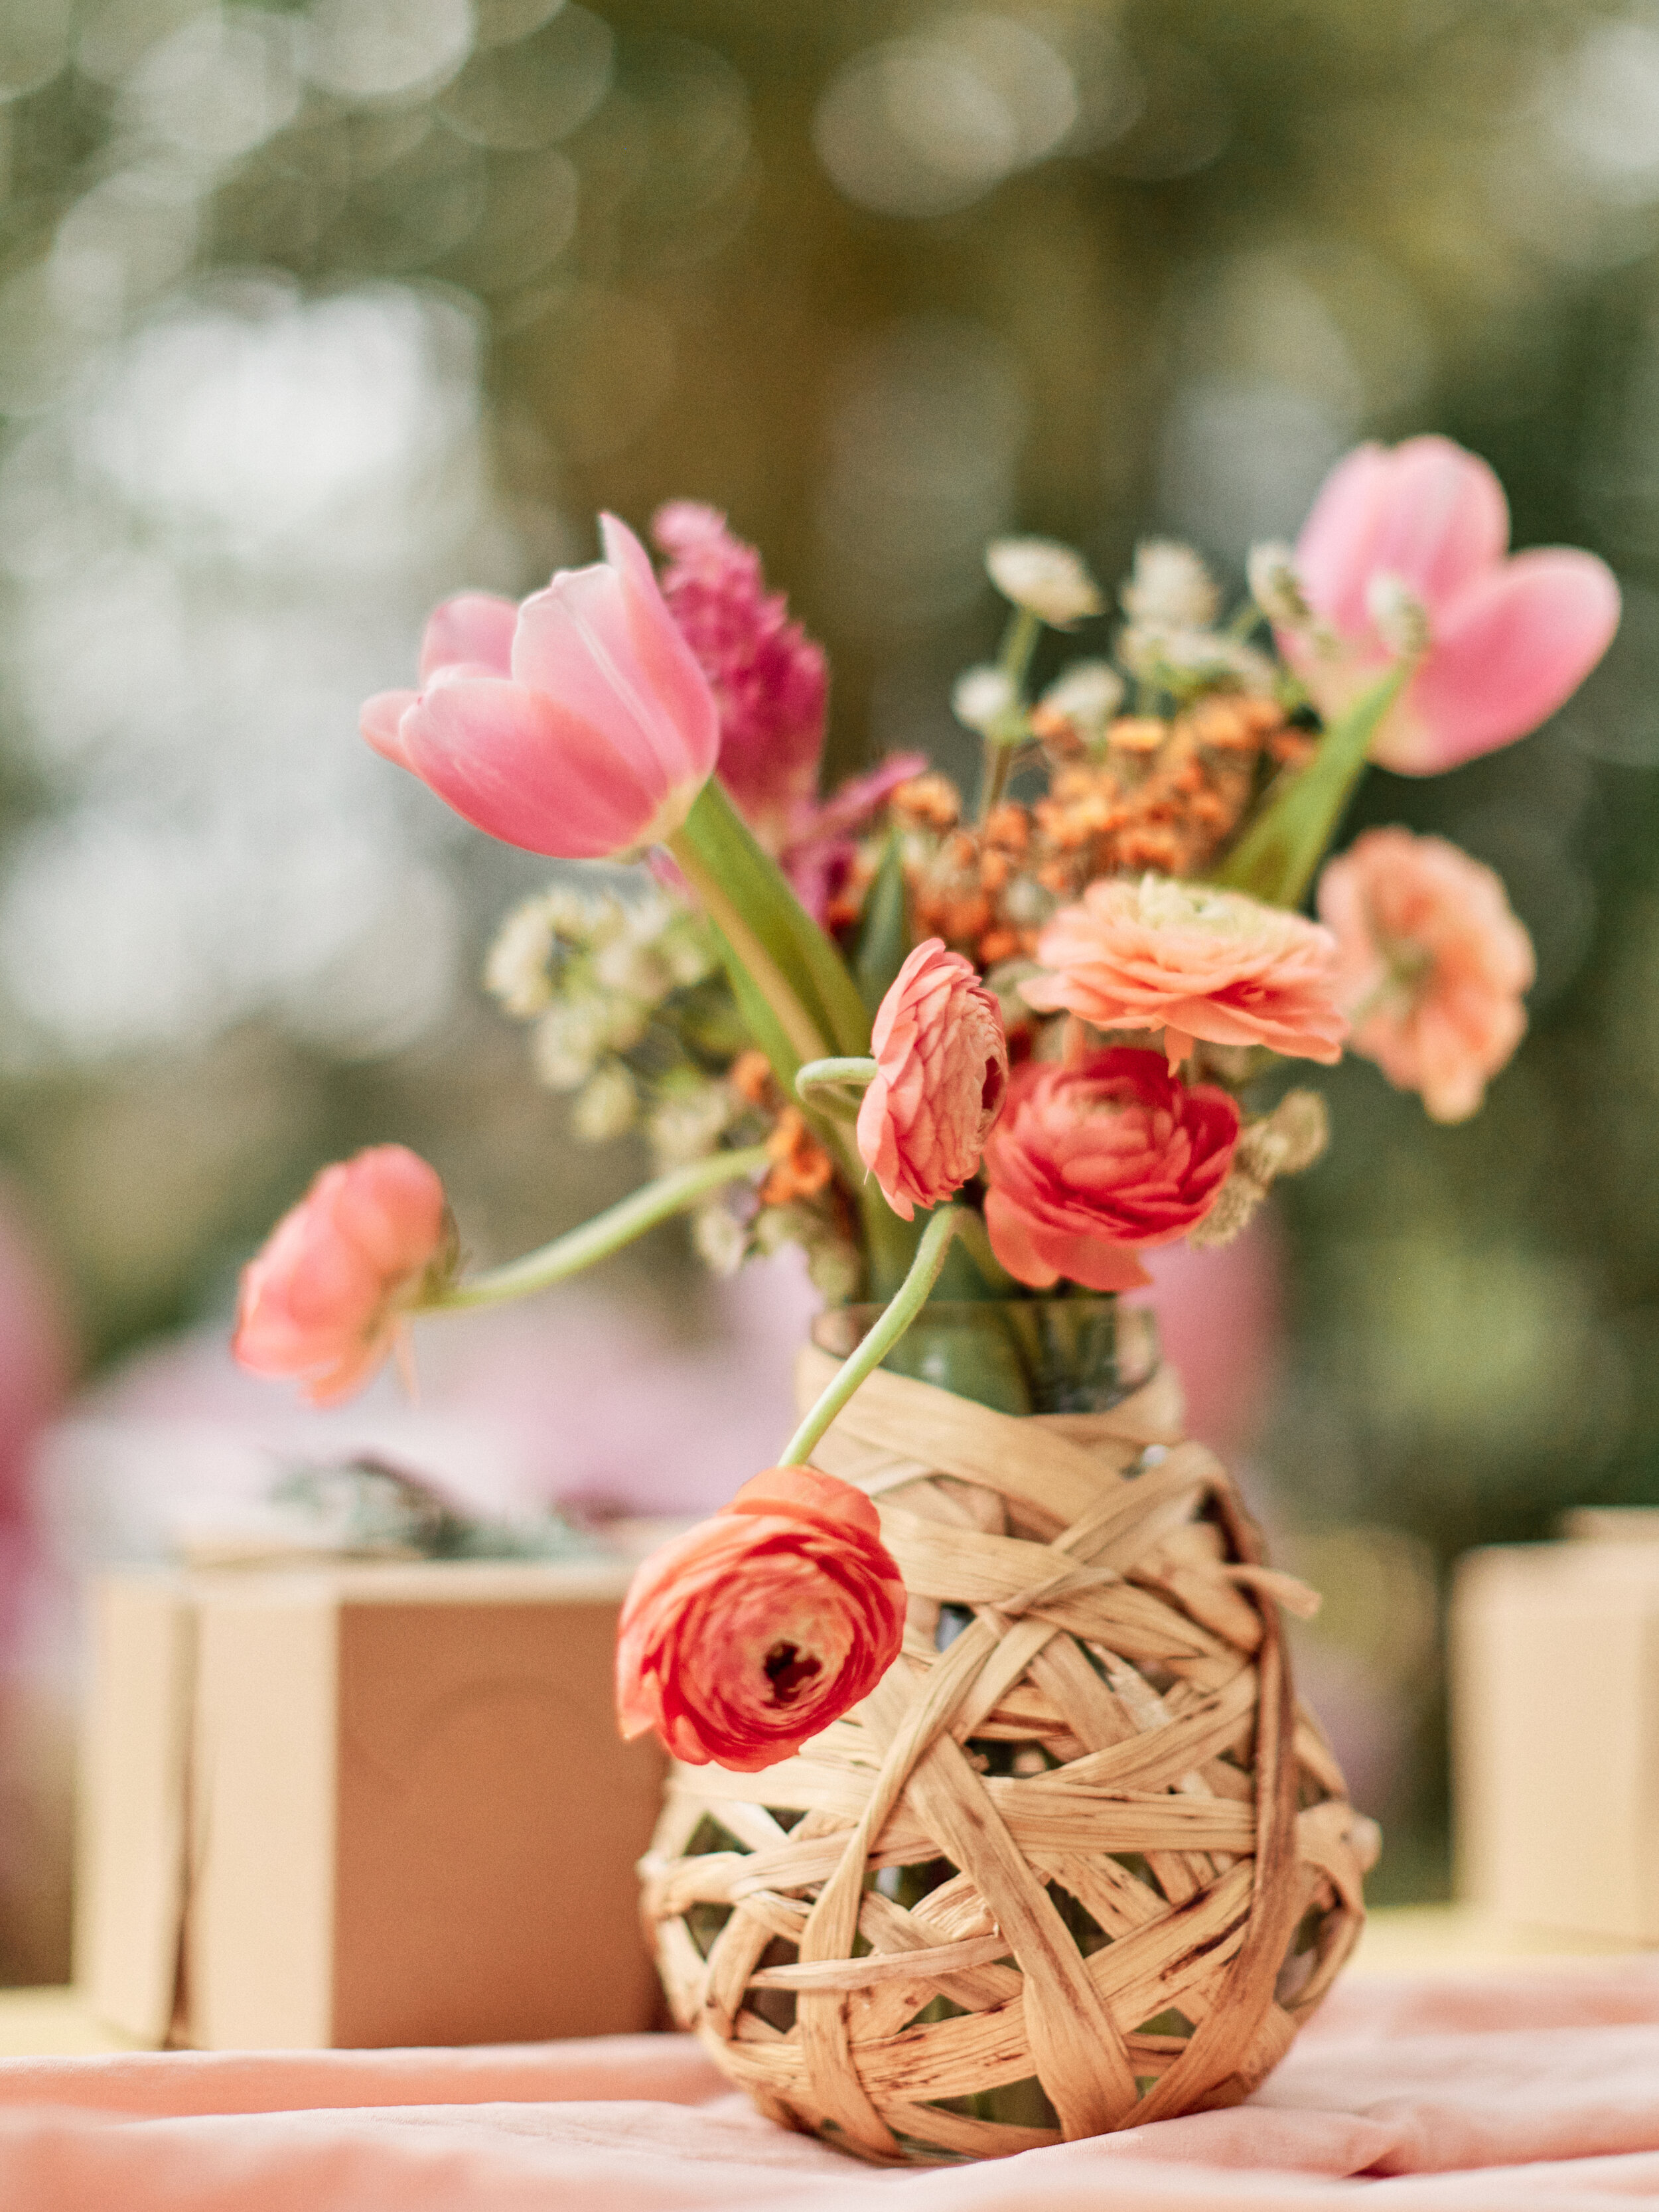 Floral arrangement in natural vase for a picnic party - get details and more party inspiration now at minteventdesign.com!